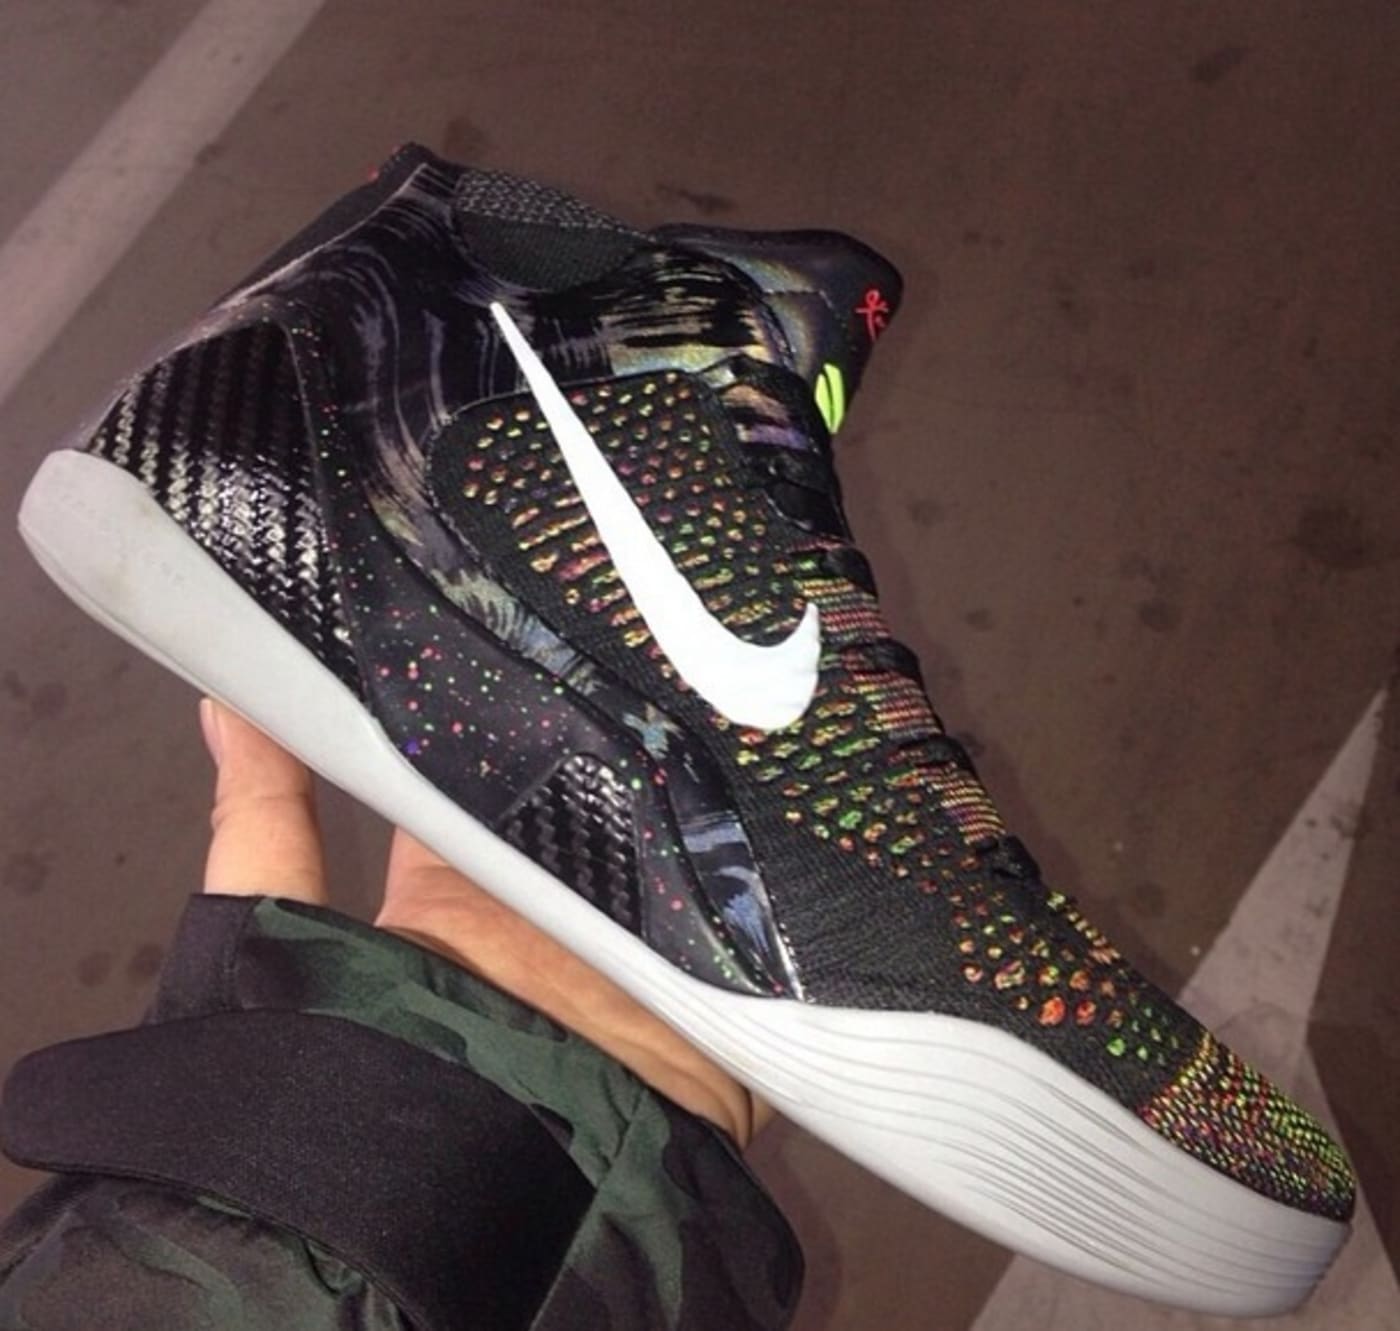 First Look at the Nike Kobe 9 EM Low | Complex Kobe 9 Low On Feet